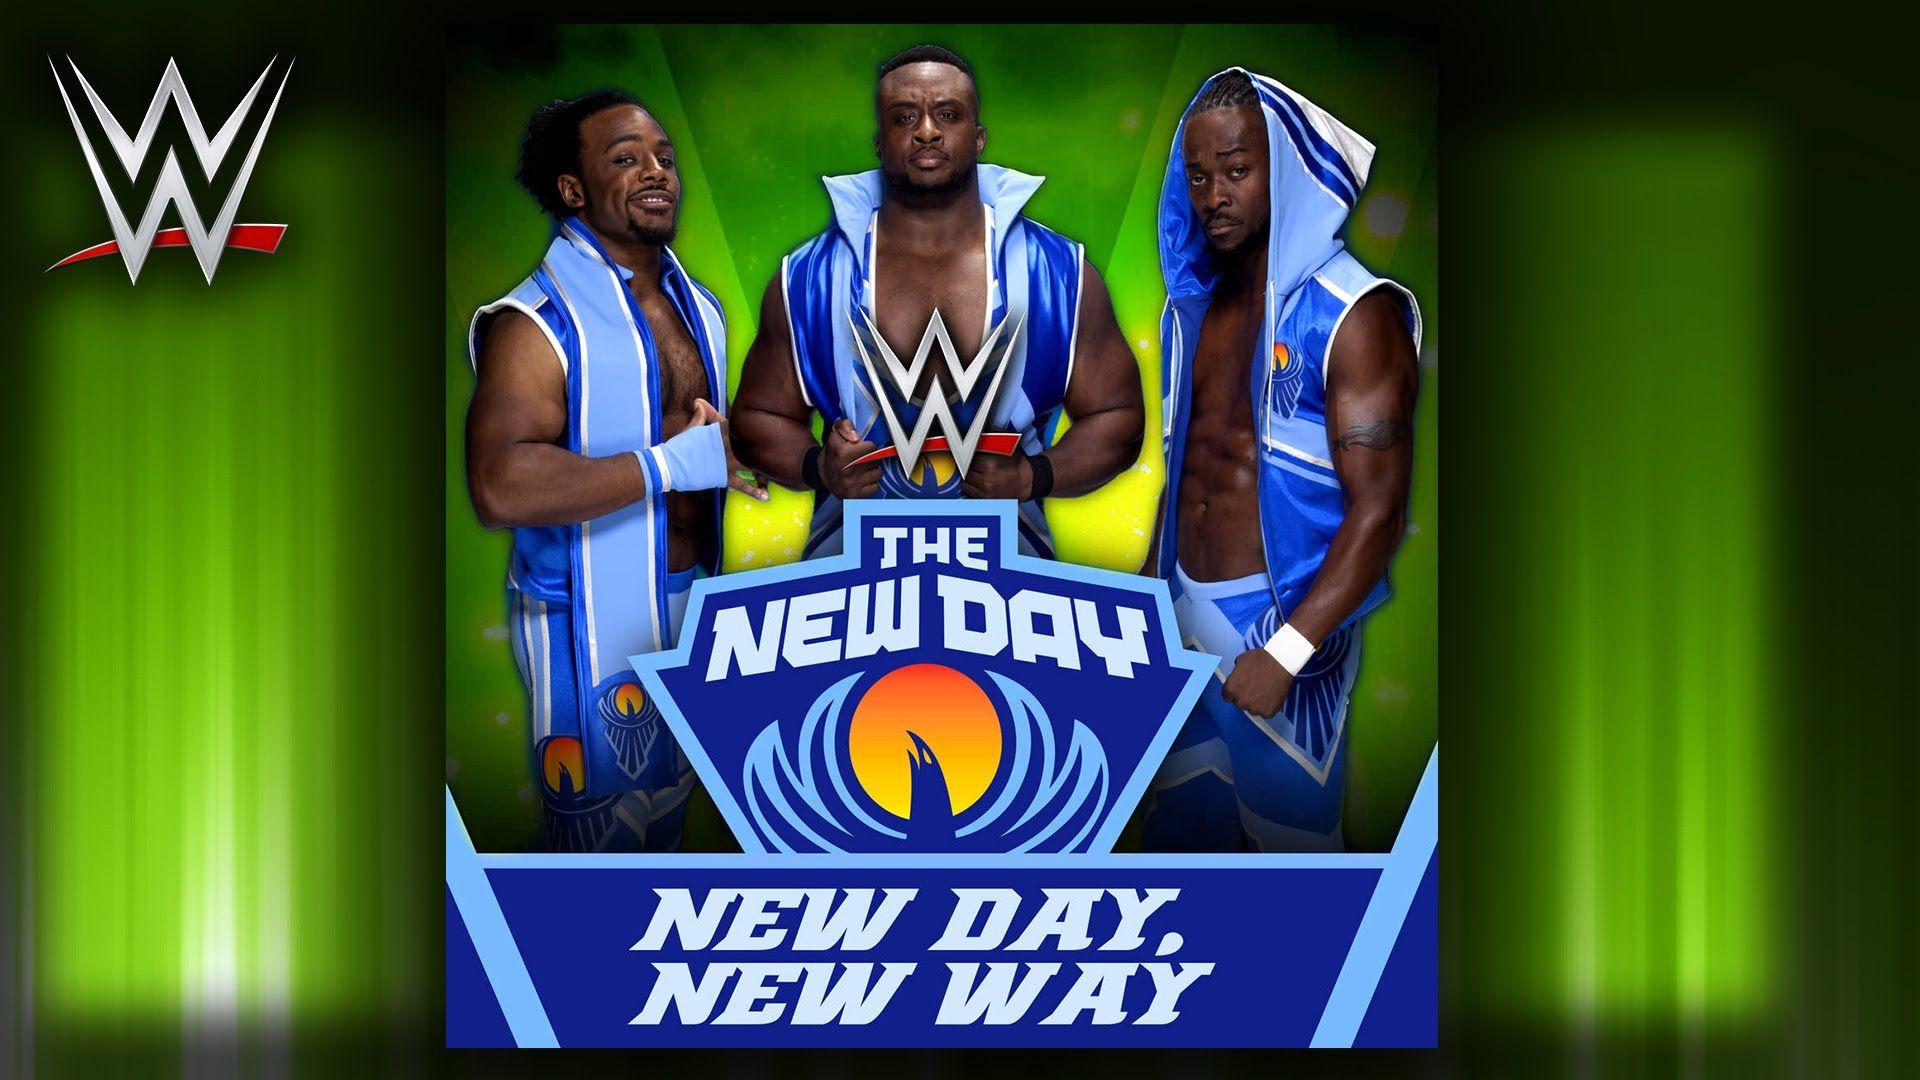 WWE: New Day, New Way (The New Day) [V2] Theme Song + AE (Arena